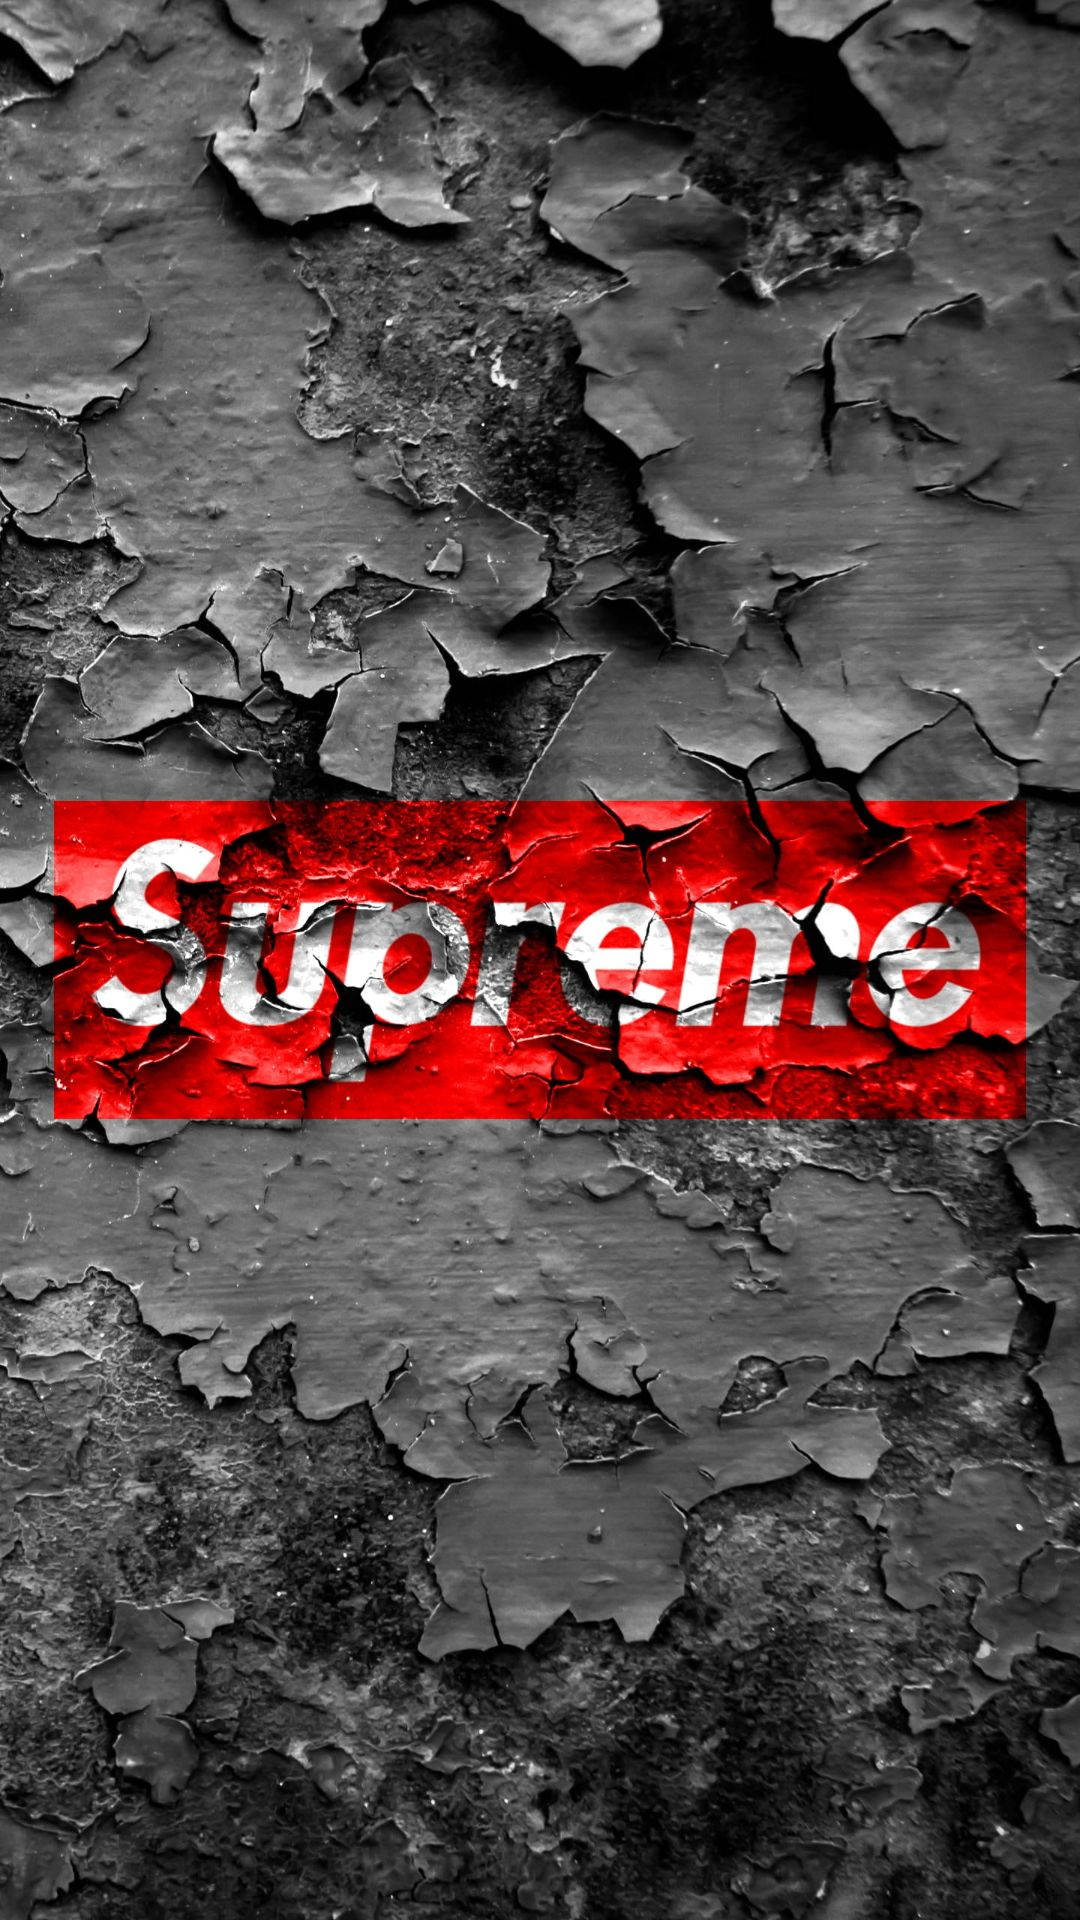 Cool Supreme Chipped Paint Background